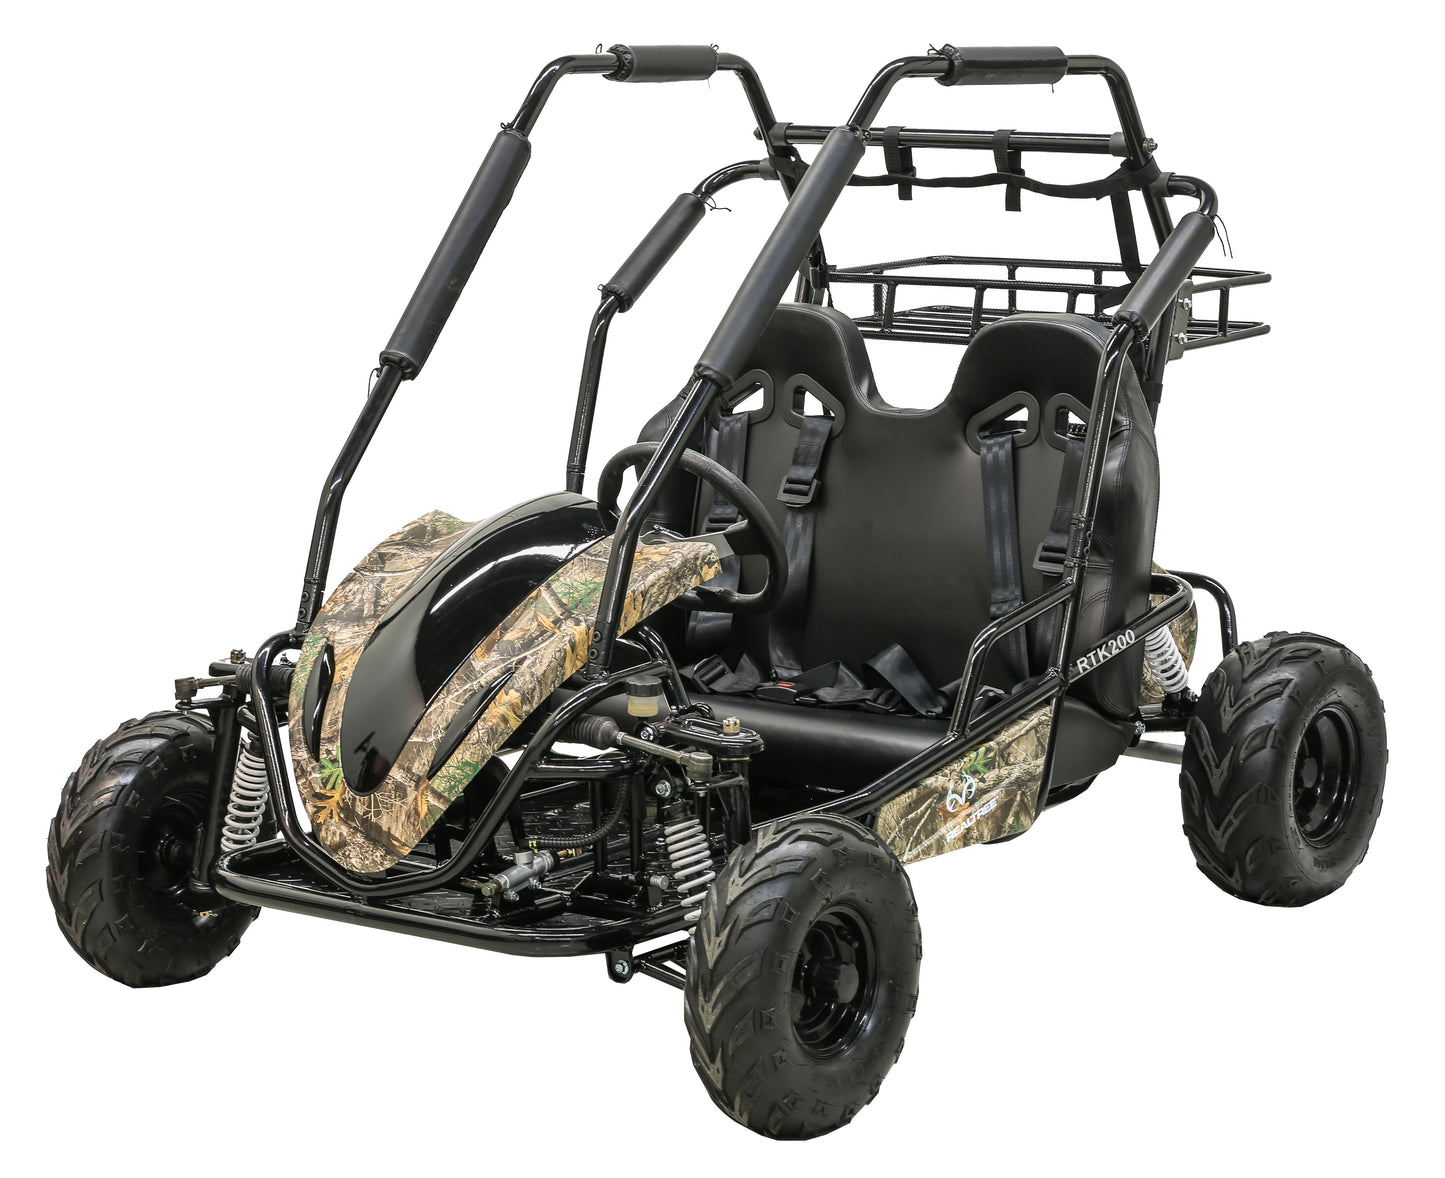 Reel Tree 196cc Gas Powered Ride On Go Cart